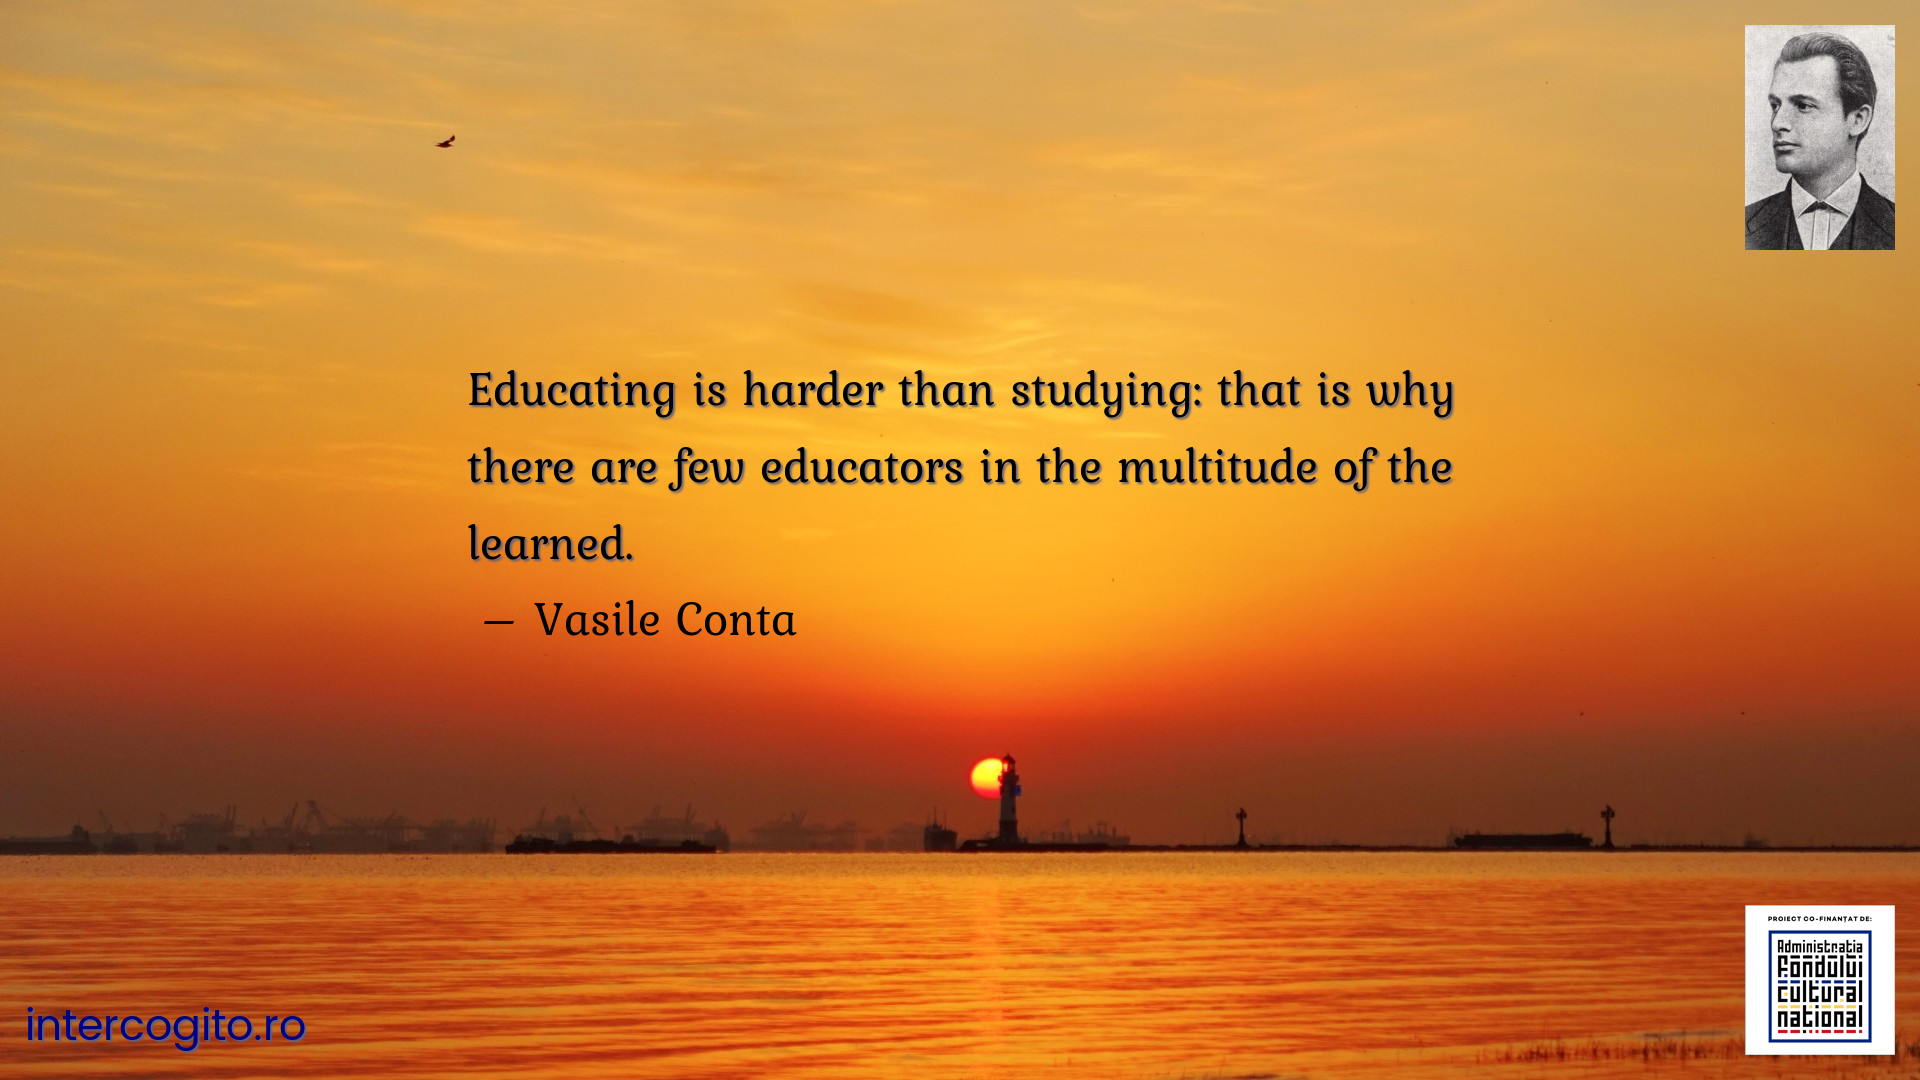 Educating is harder than studying: that is why there are few educators in the multitude of the learned.